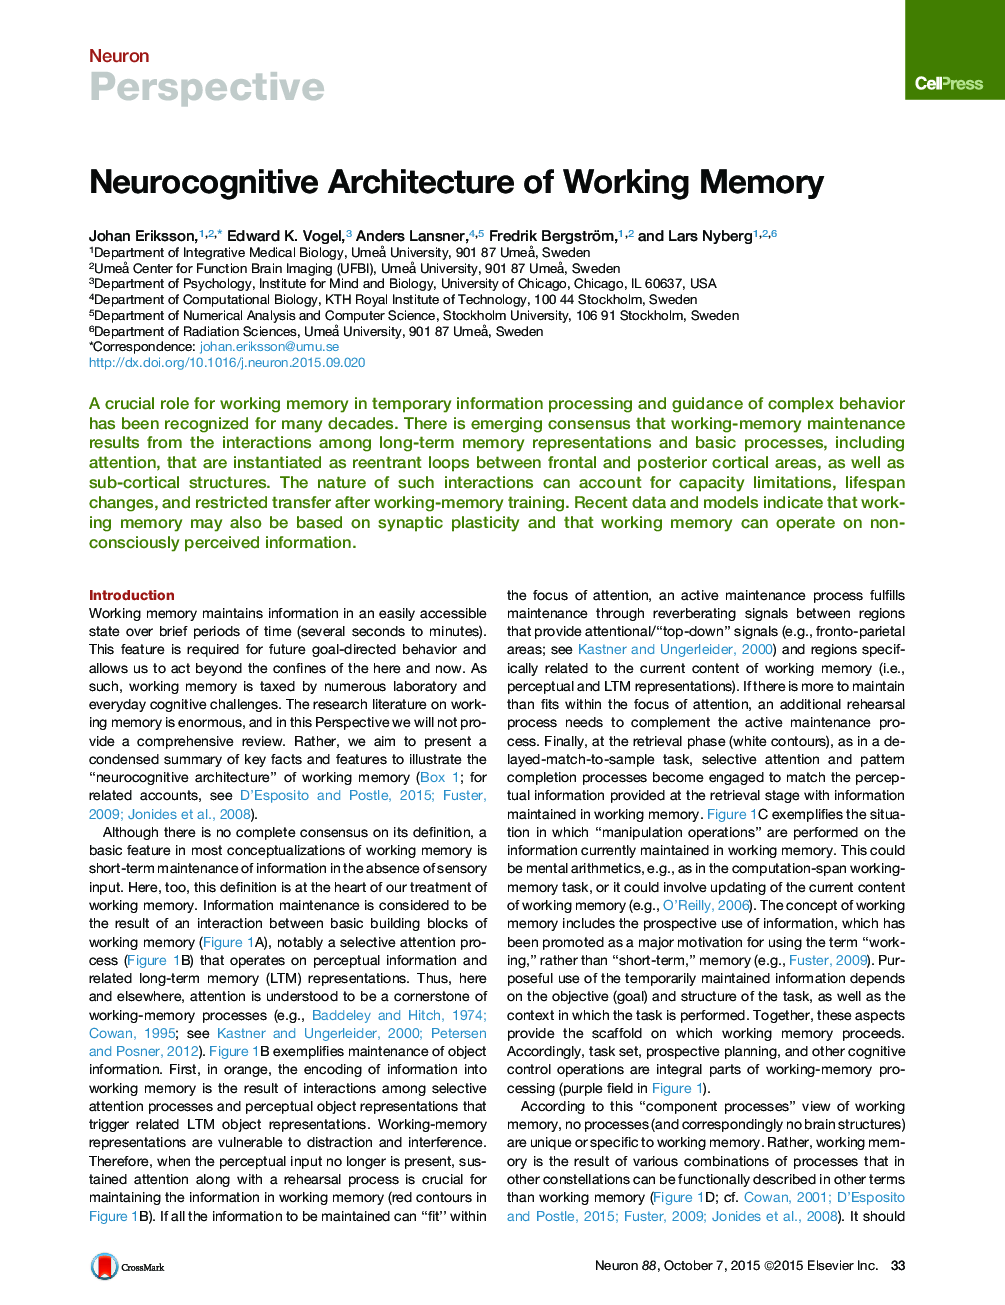 Neurocognitive Architecture of Working Memory